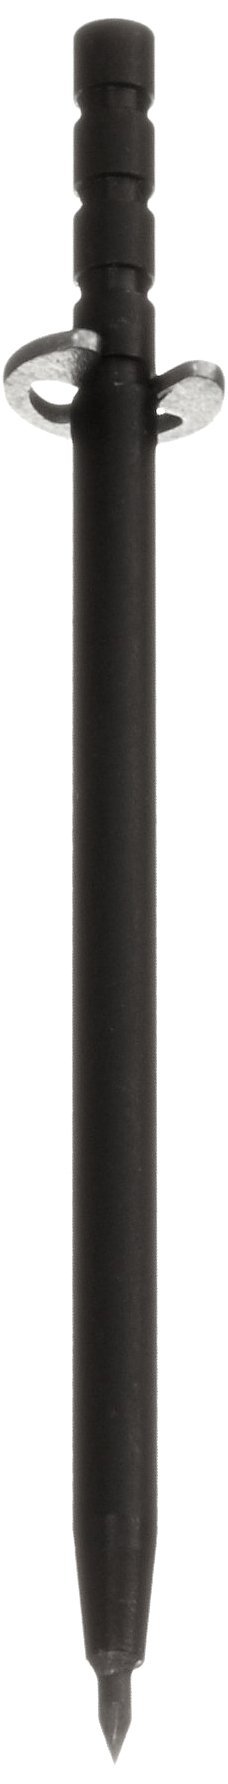 Brown & Sharpe 599-777-1 Replacement Point for Retractable Carbide Scriber